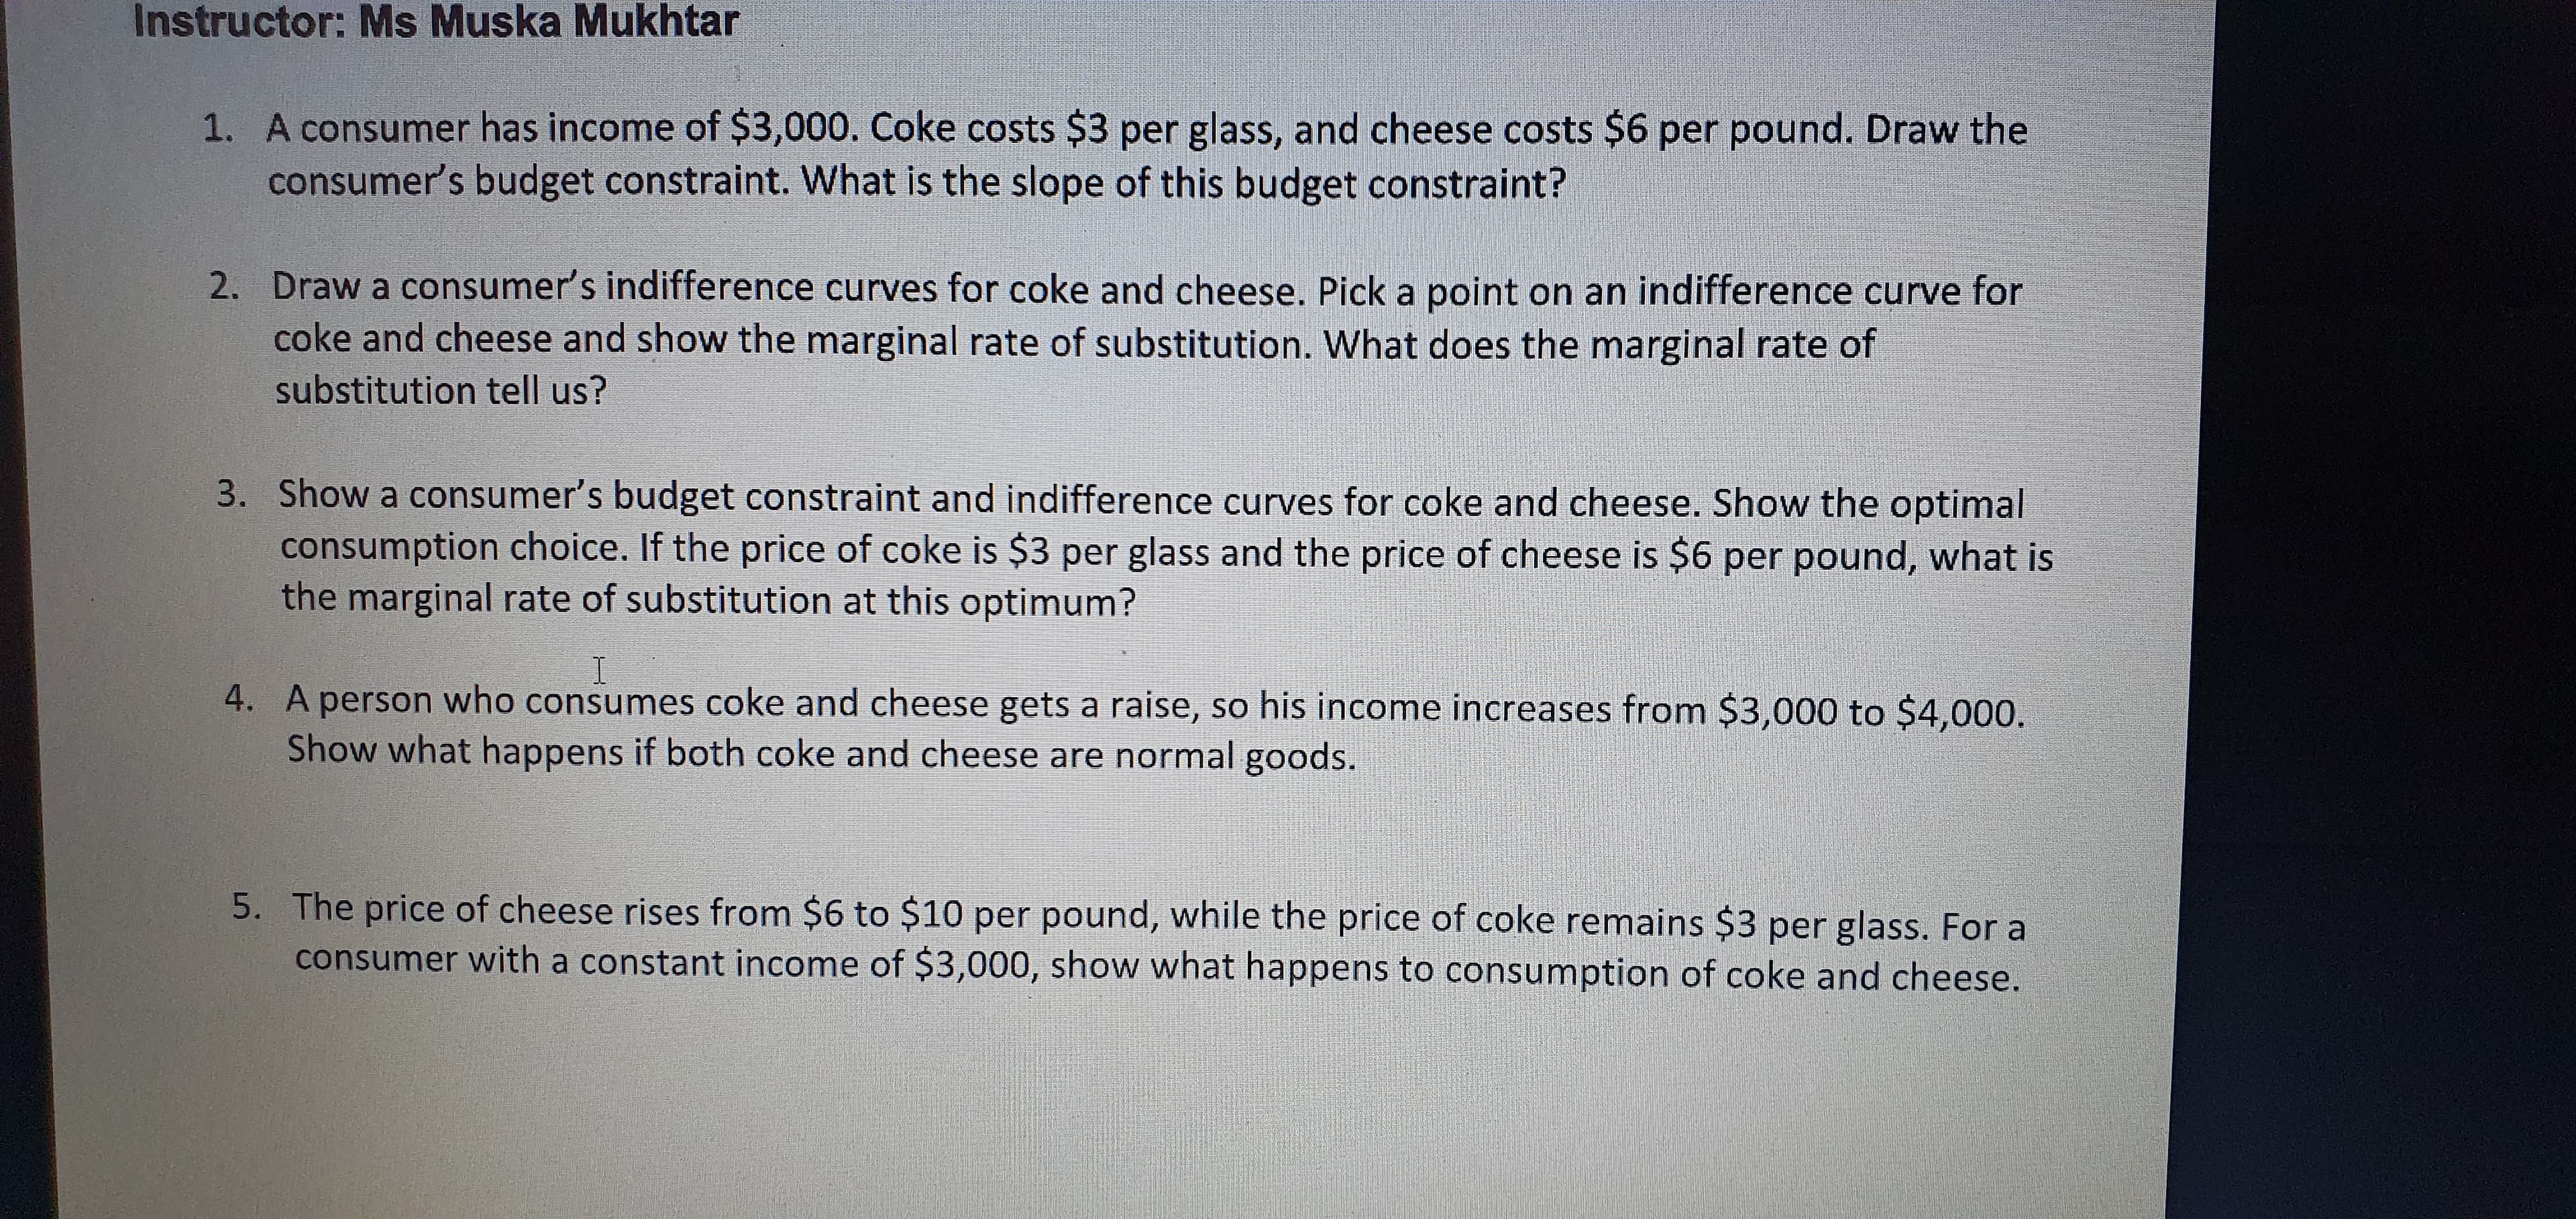 A consumer has income of $3,000. Coke costs $3 per glass, and cheese costs $6 per pound. Draw the
consumer's budget constraint. What is the slope of this budget constraint?
